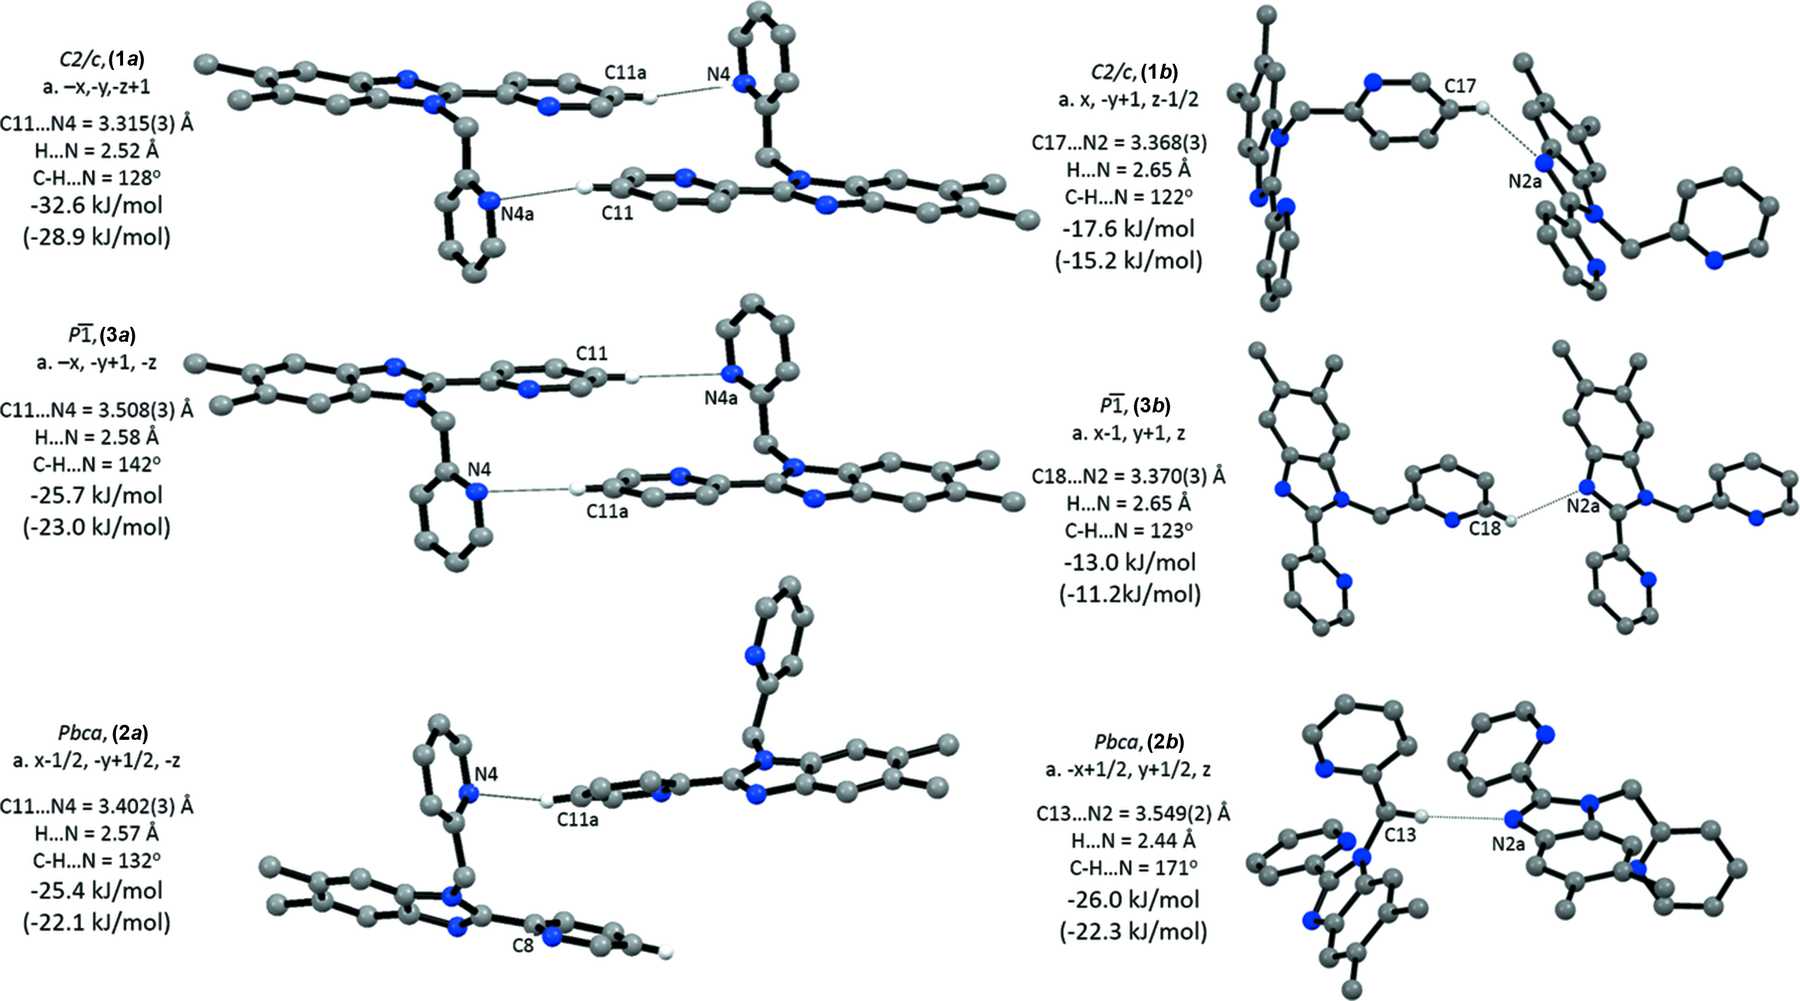 Iucr Conformational Differences And Intermolecular C H N Interactions In Three Polymorphs Of A Bis Pyridinyl Substituted Benzimidazole